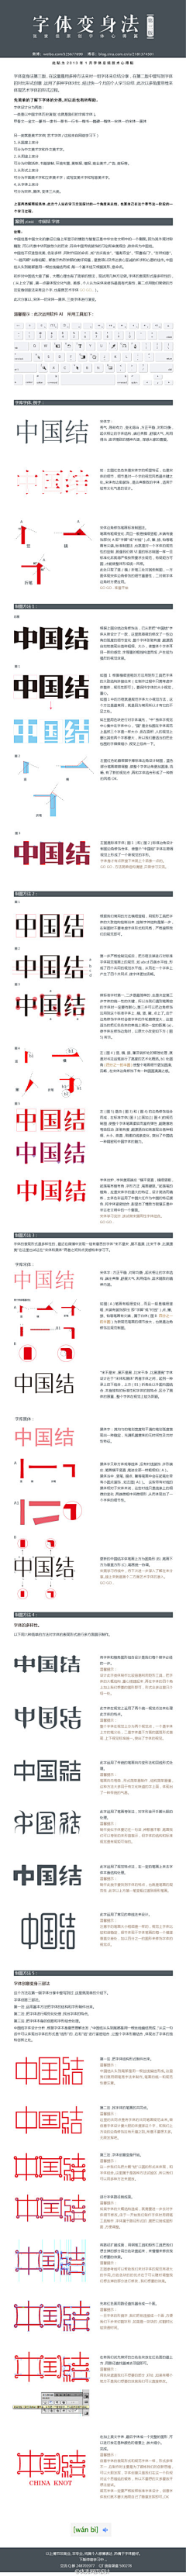 SUNLSONG采集到字体设计